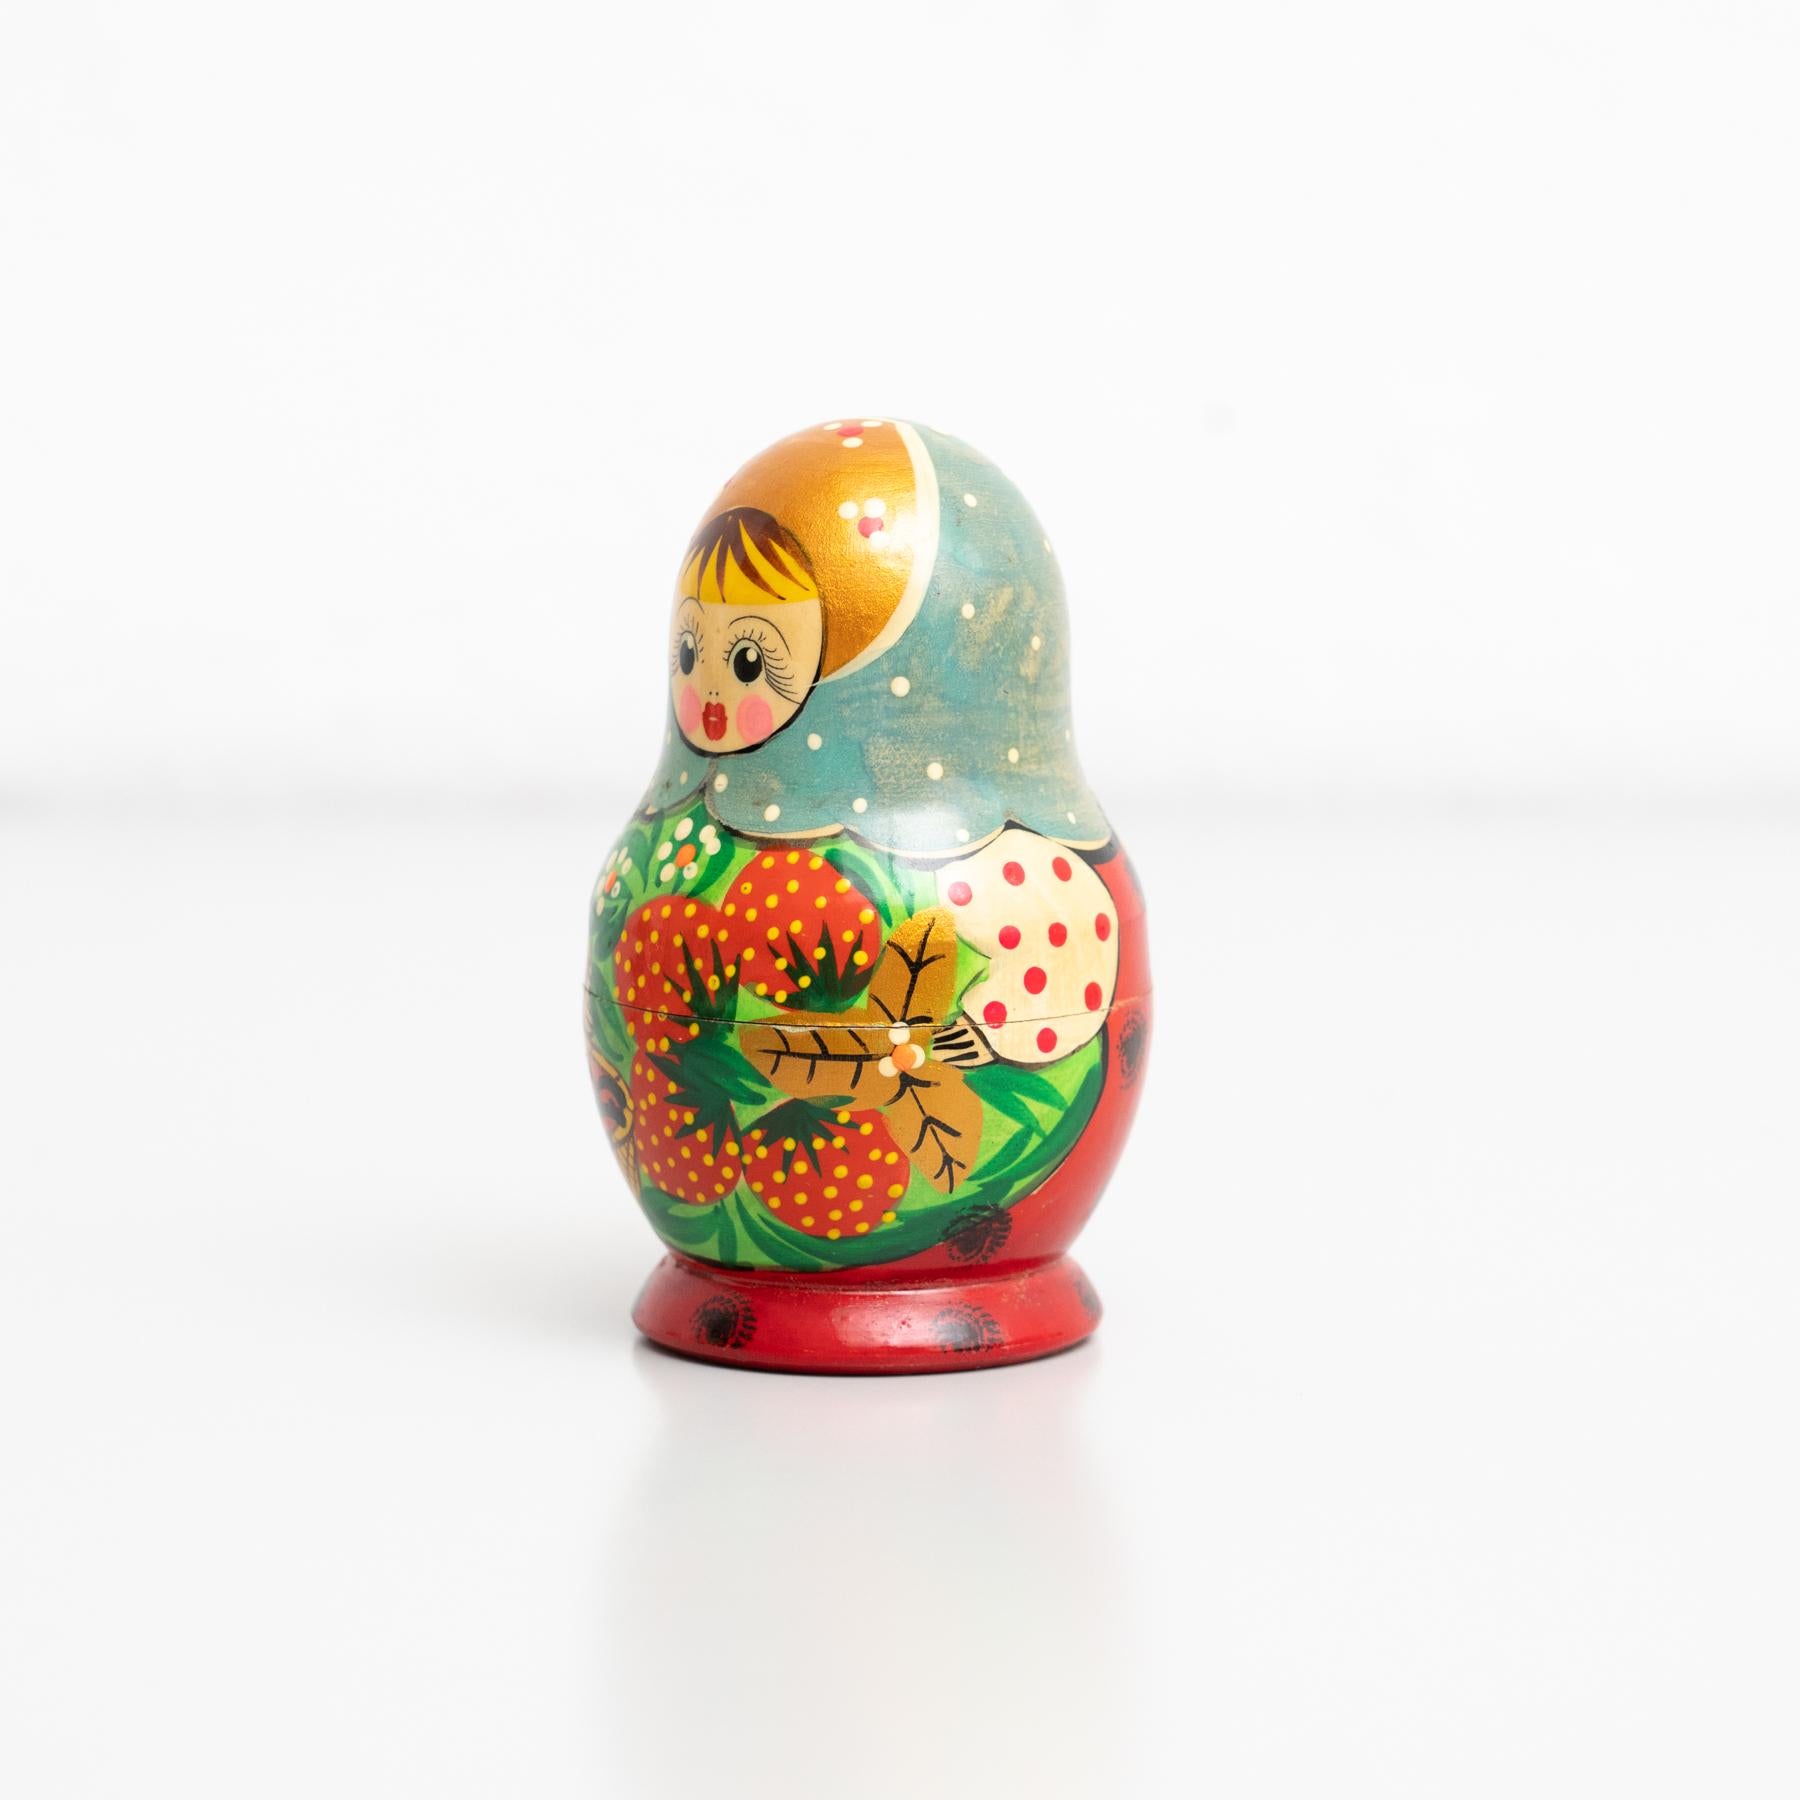 Antique Traditional Hand-Painted Wooden Russian Doll, circa 1960 For Sale 1